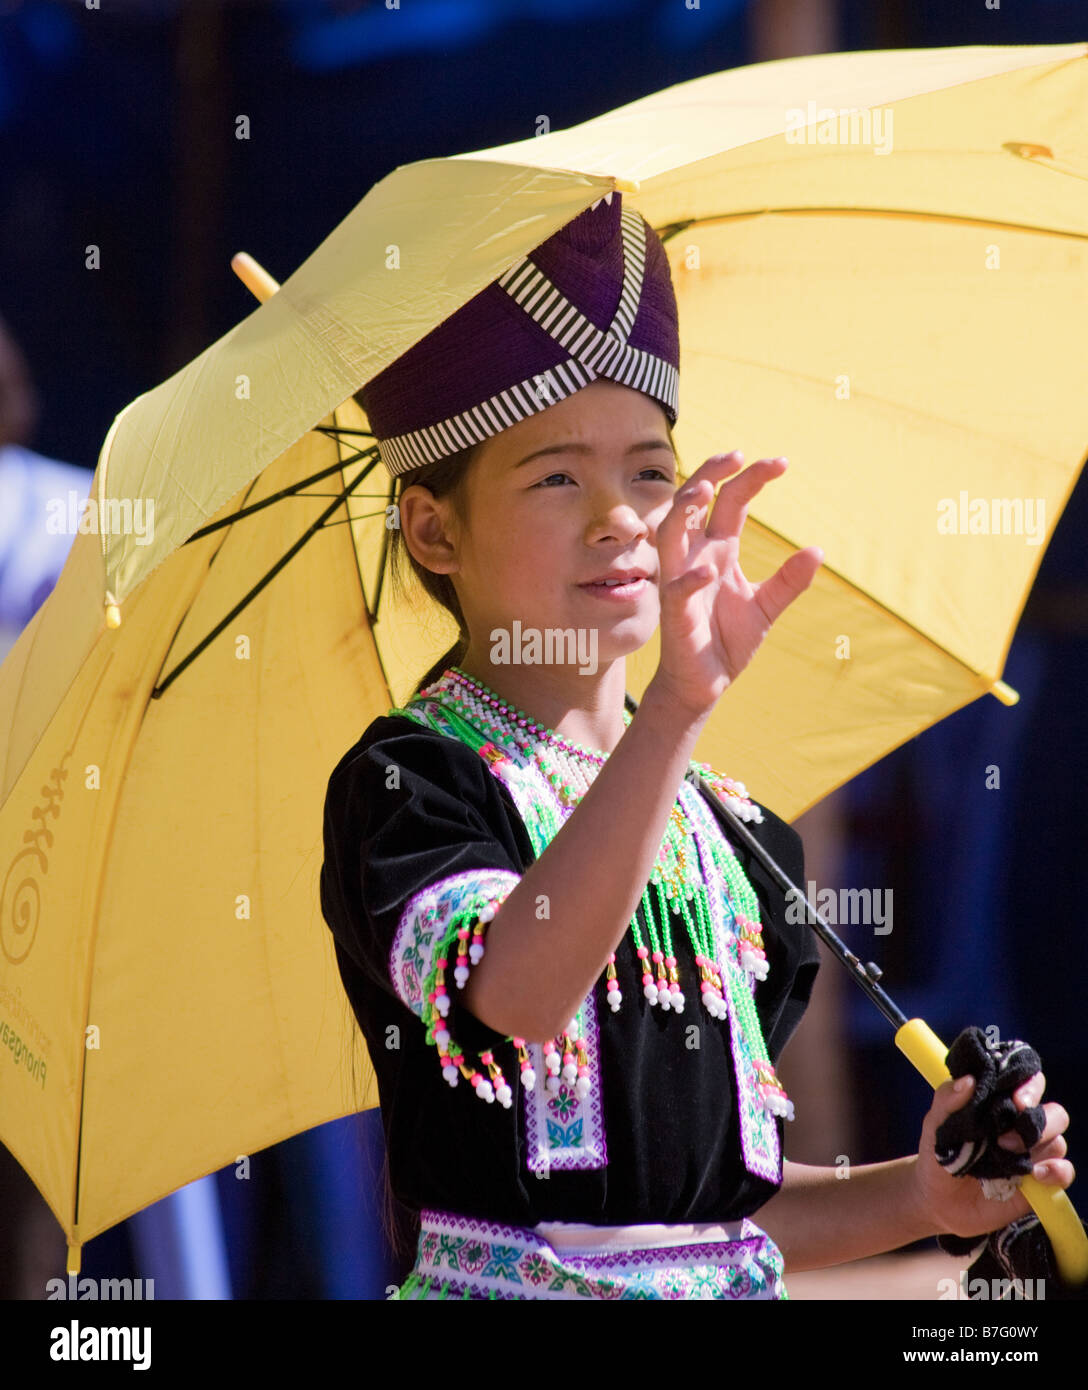 A young Hmong girl in traditional dress prepares to catch a ball at a ...